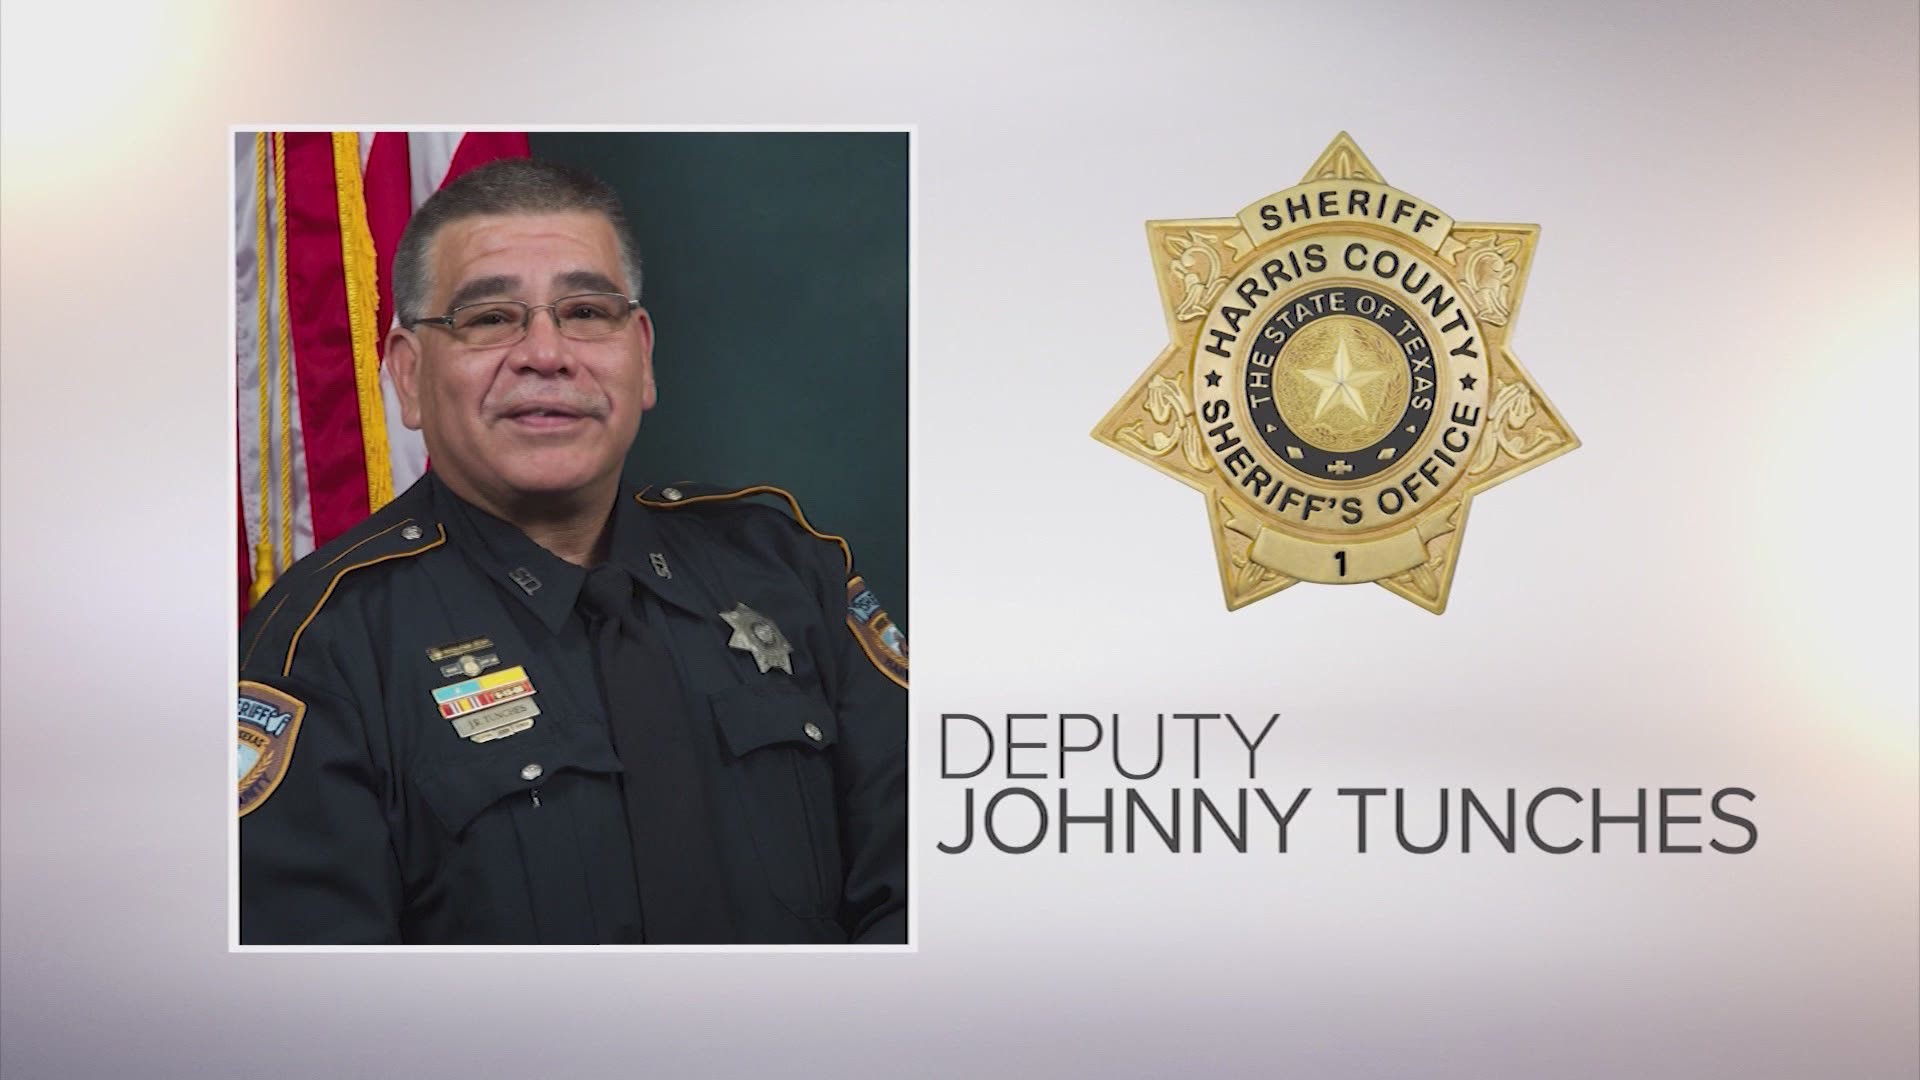 A celebration of life and a farewell was held for Deputy Johnny Tunches on Thursday.